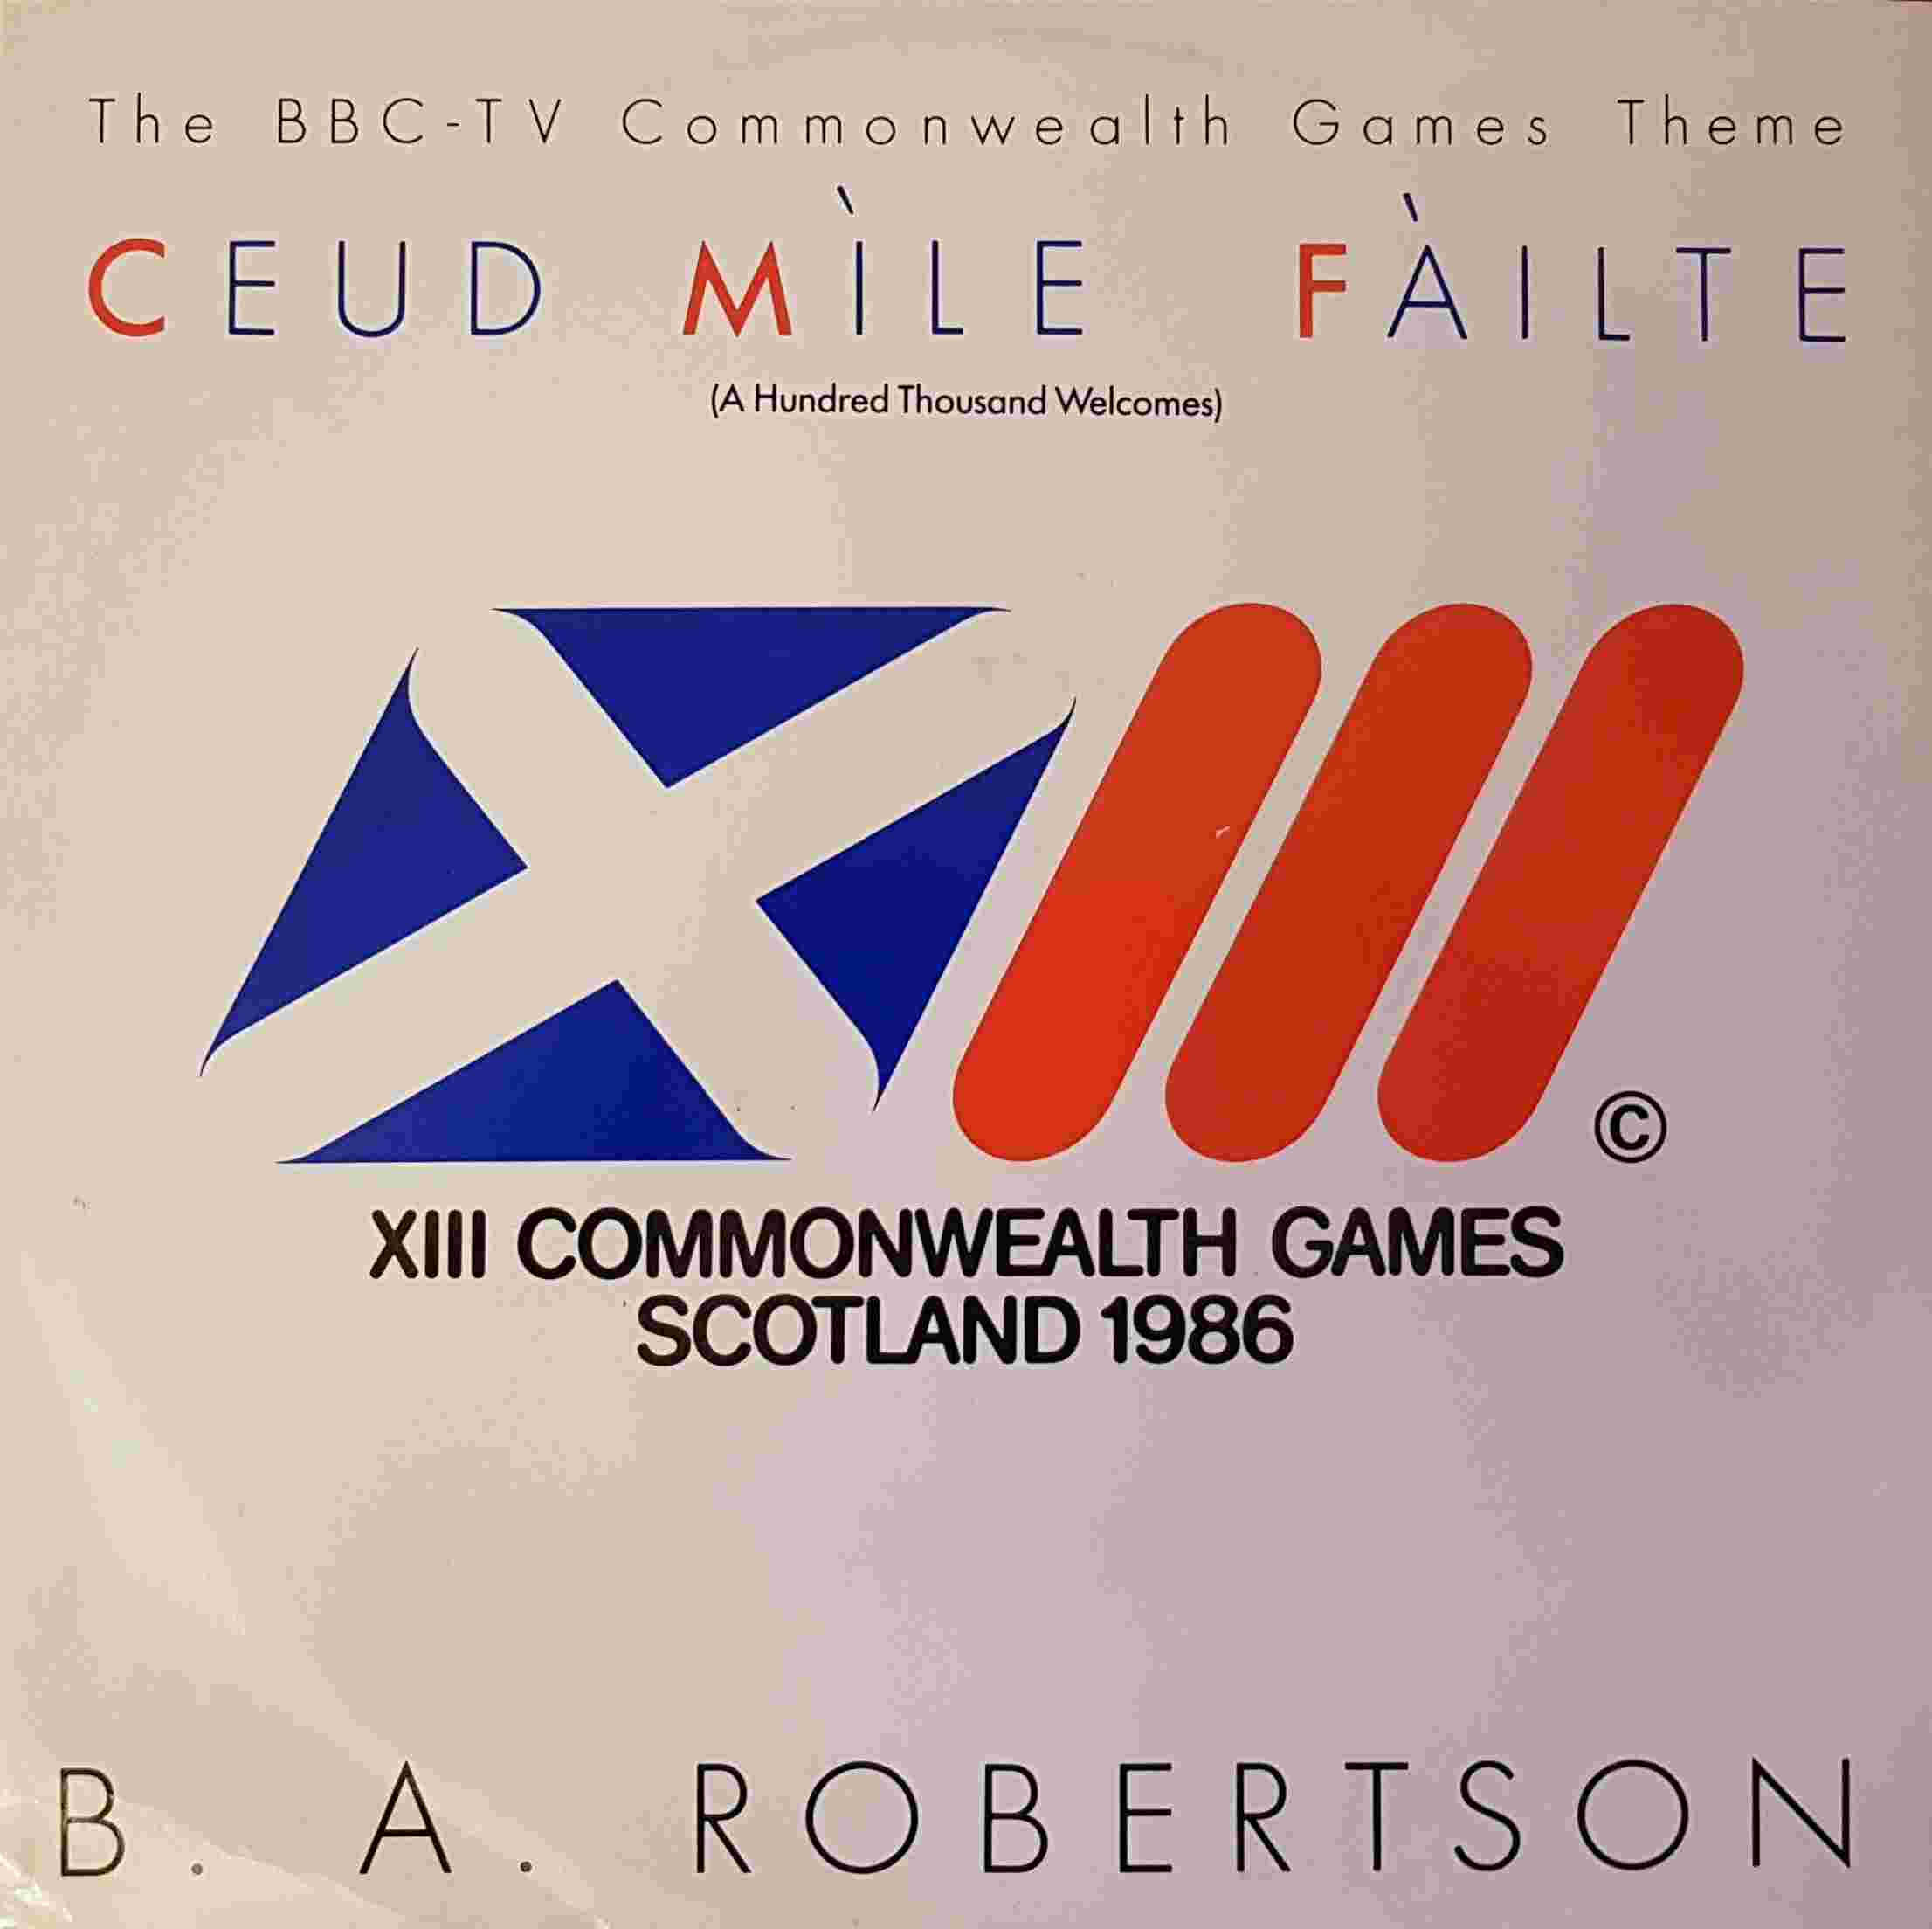 Picture of Ceud mile failte (Commonwealth games '86) by artist B. A. Robertson from the BBC 12inches - Records and Tapes library